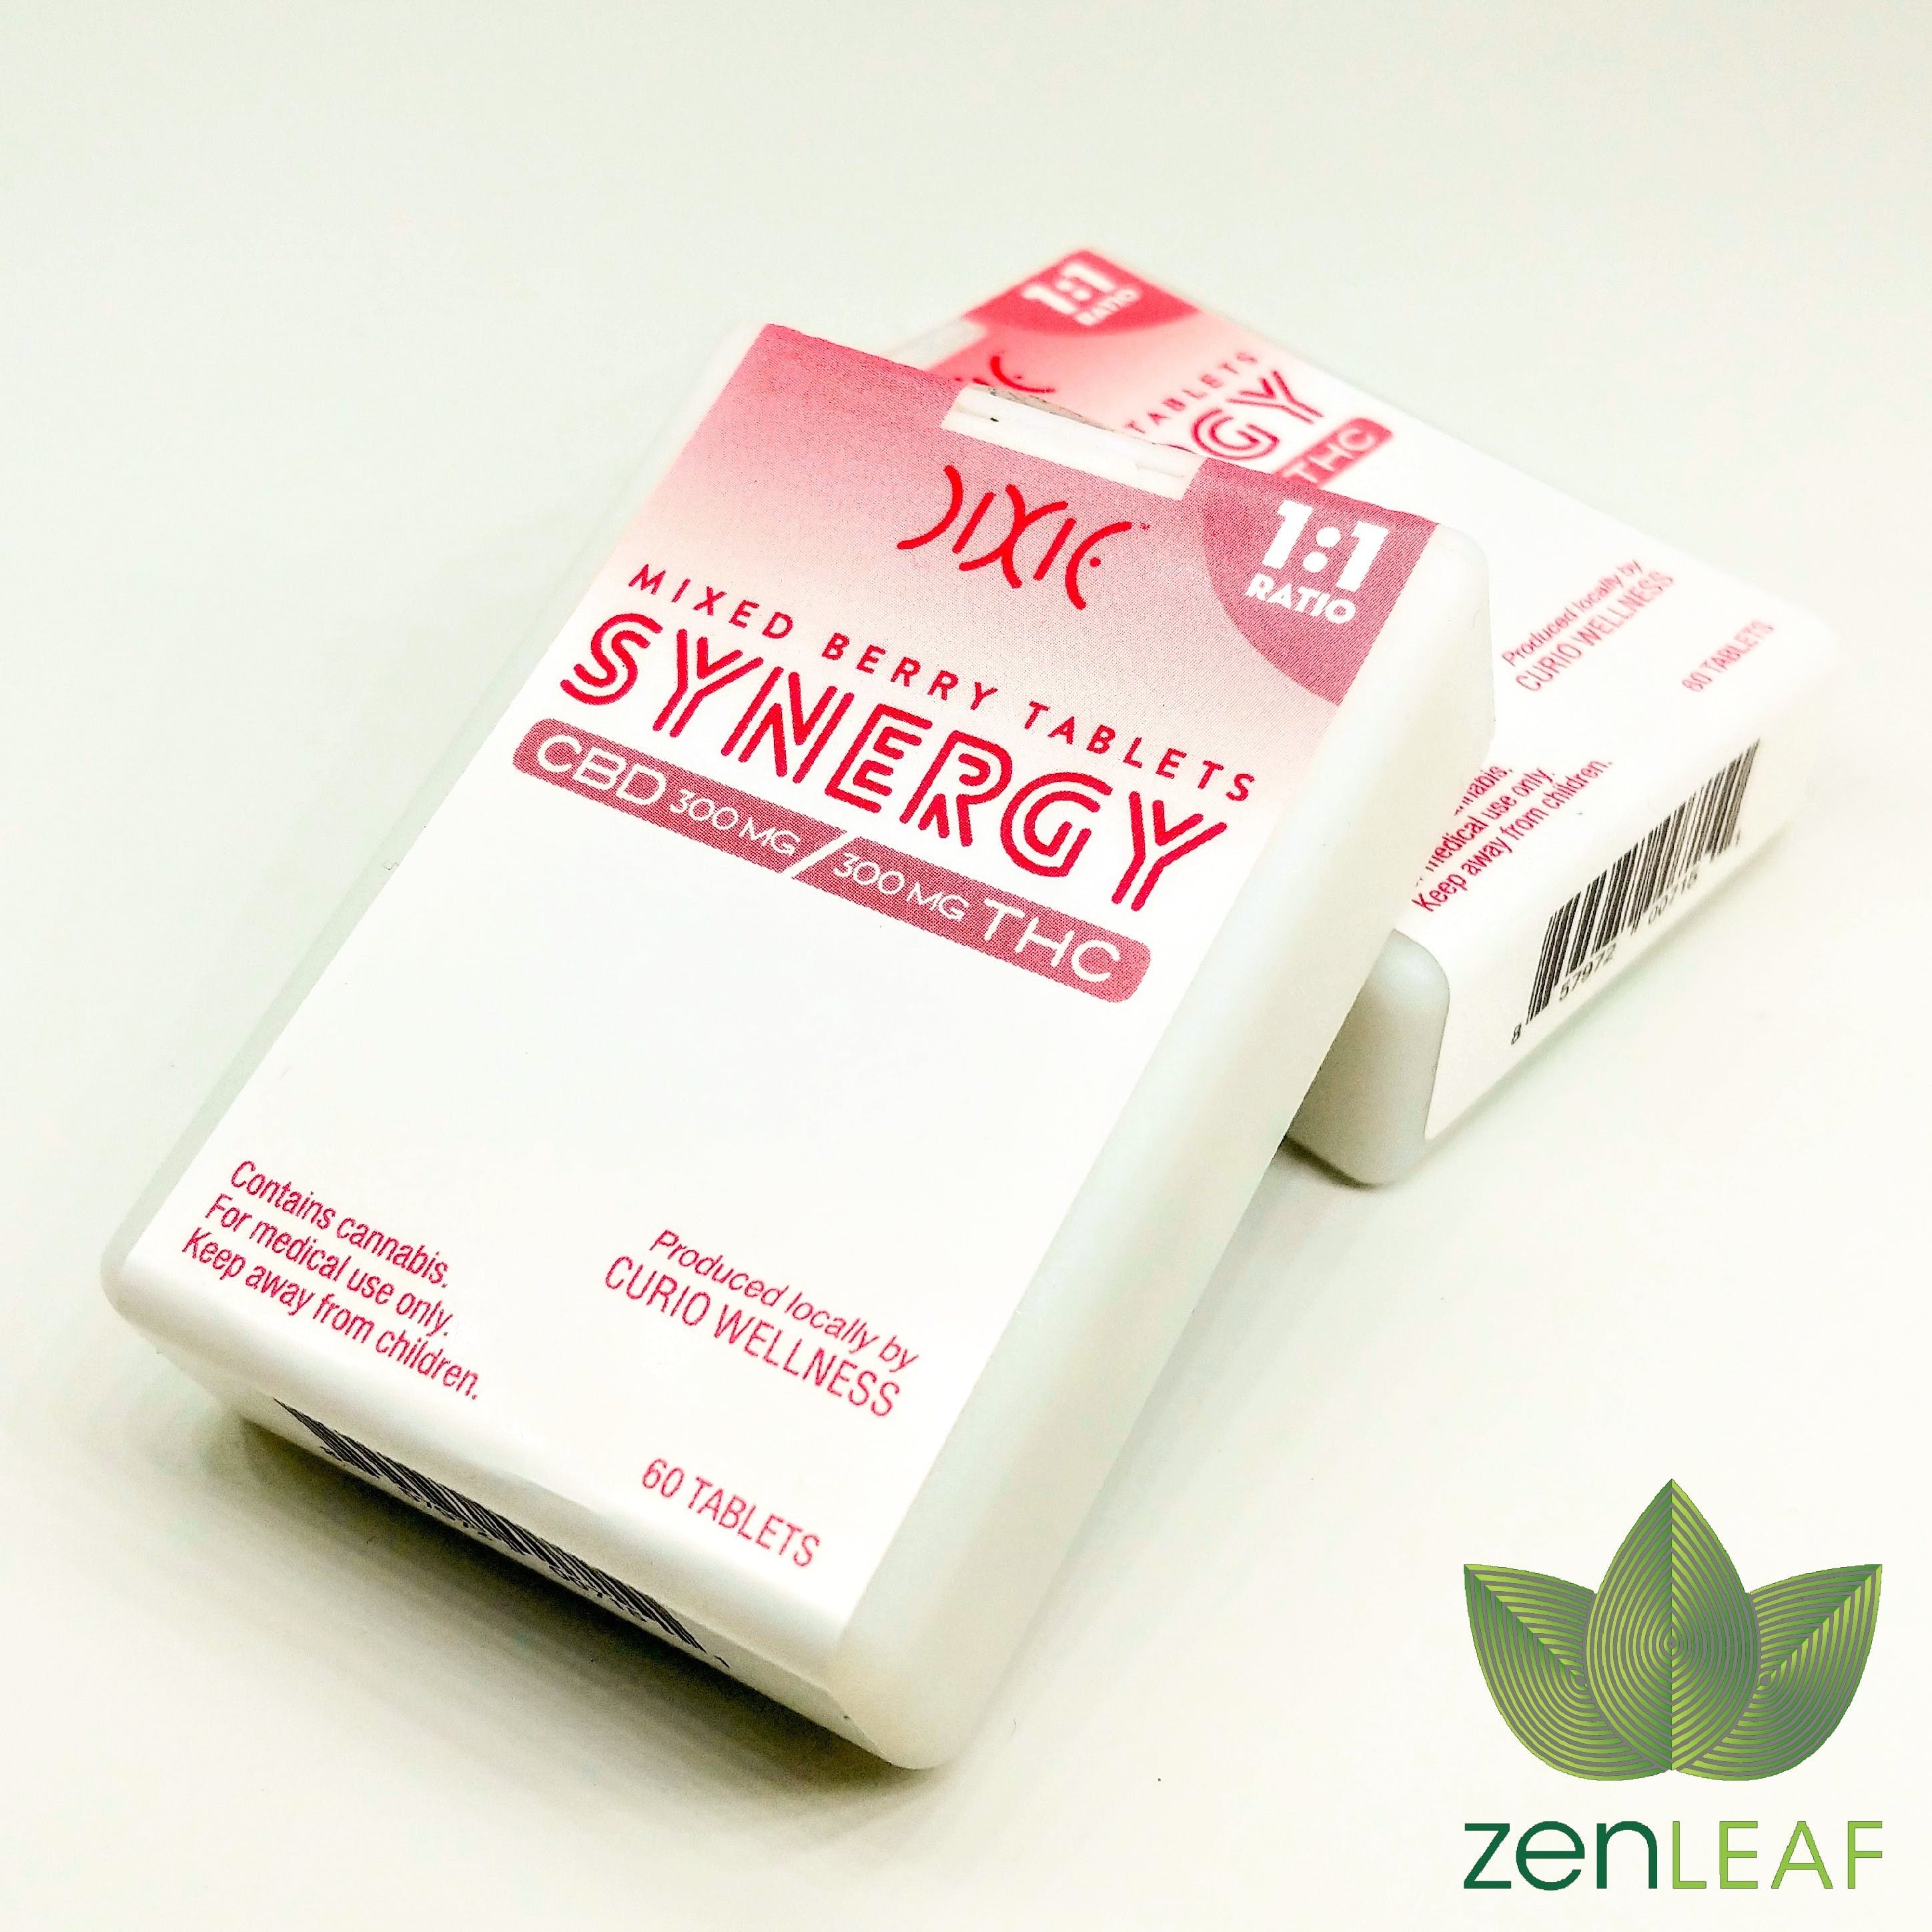 marijuana-dispensaries-7221-montevideo-road-2c-ste-150-jessup-dixie-synergy-tablets-mixed-berry-300mg